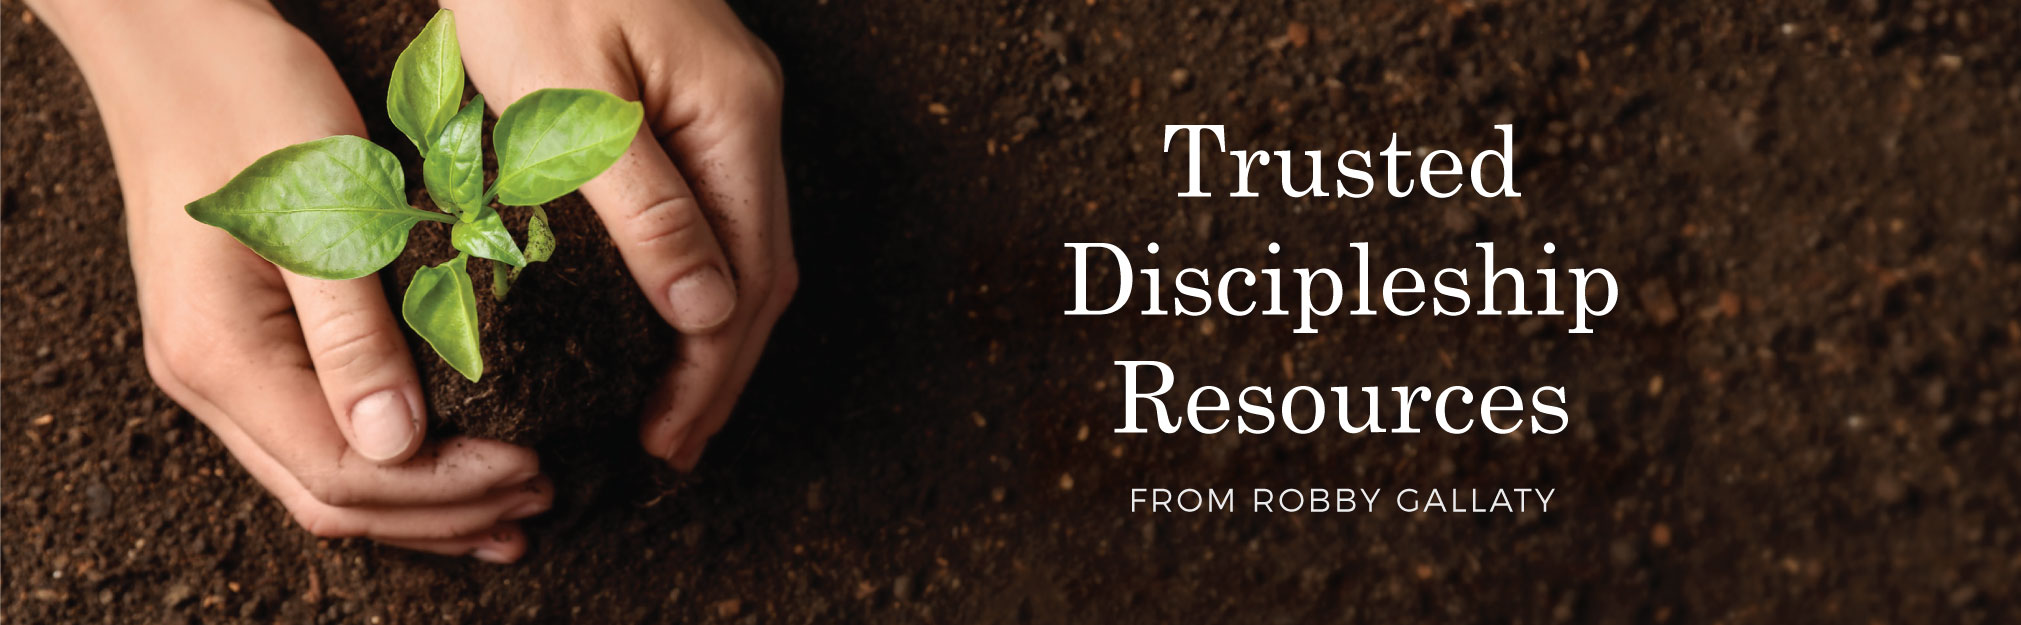 Trusted Discipleship Resources by Robby Gallaty